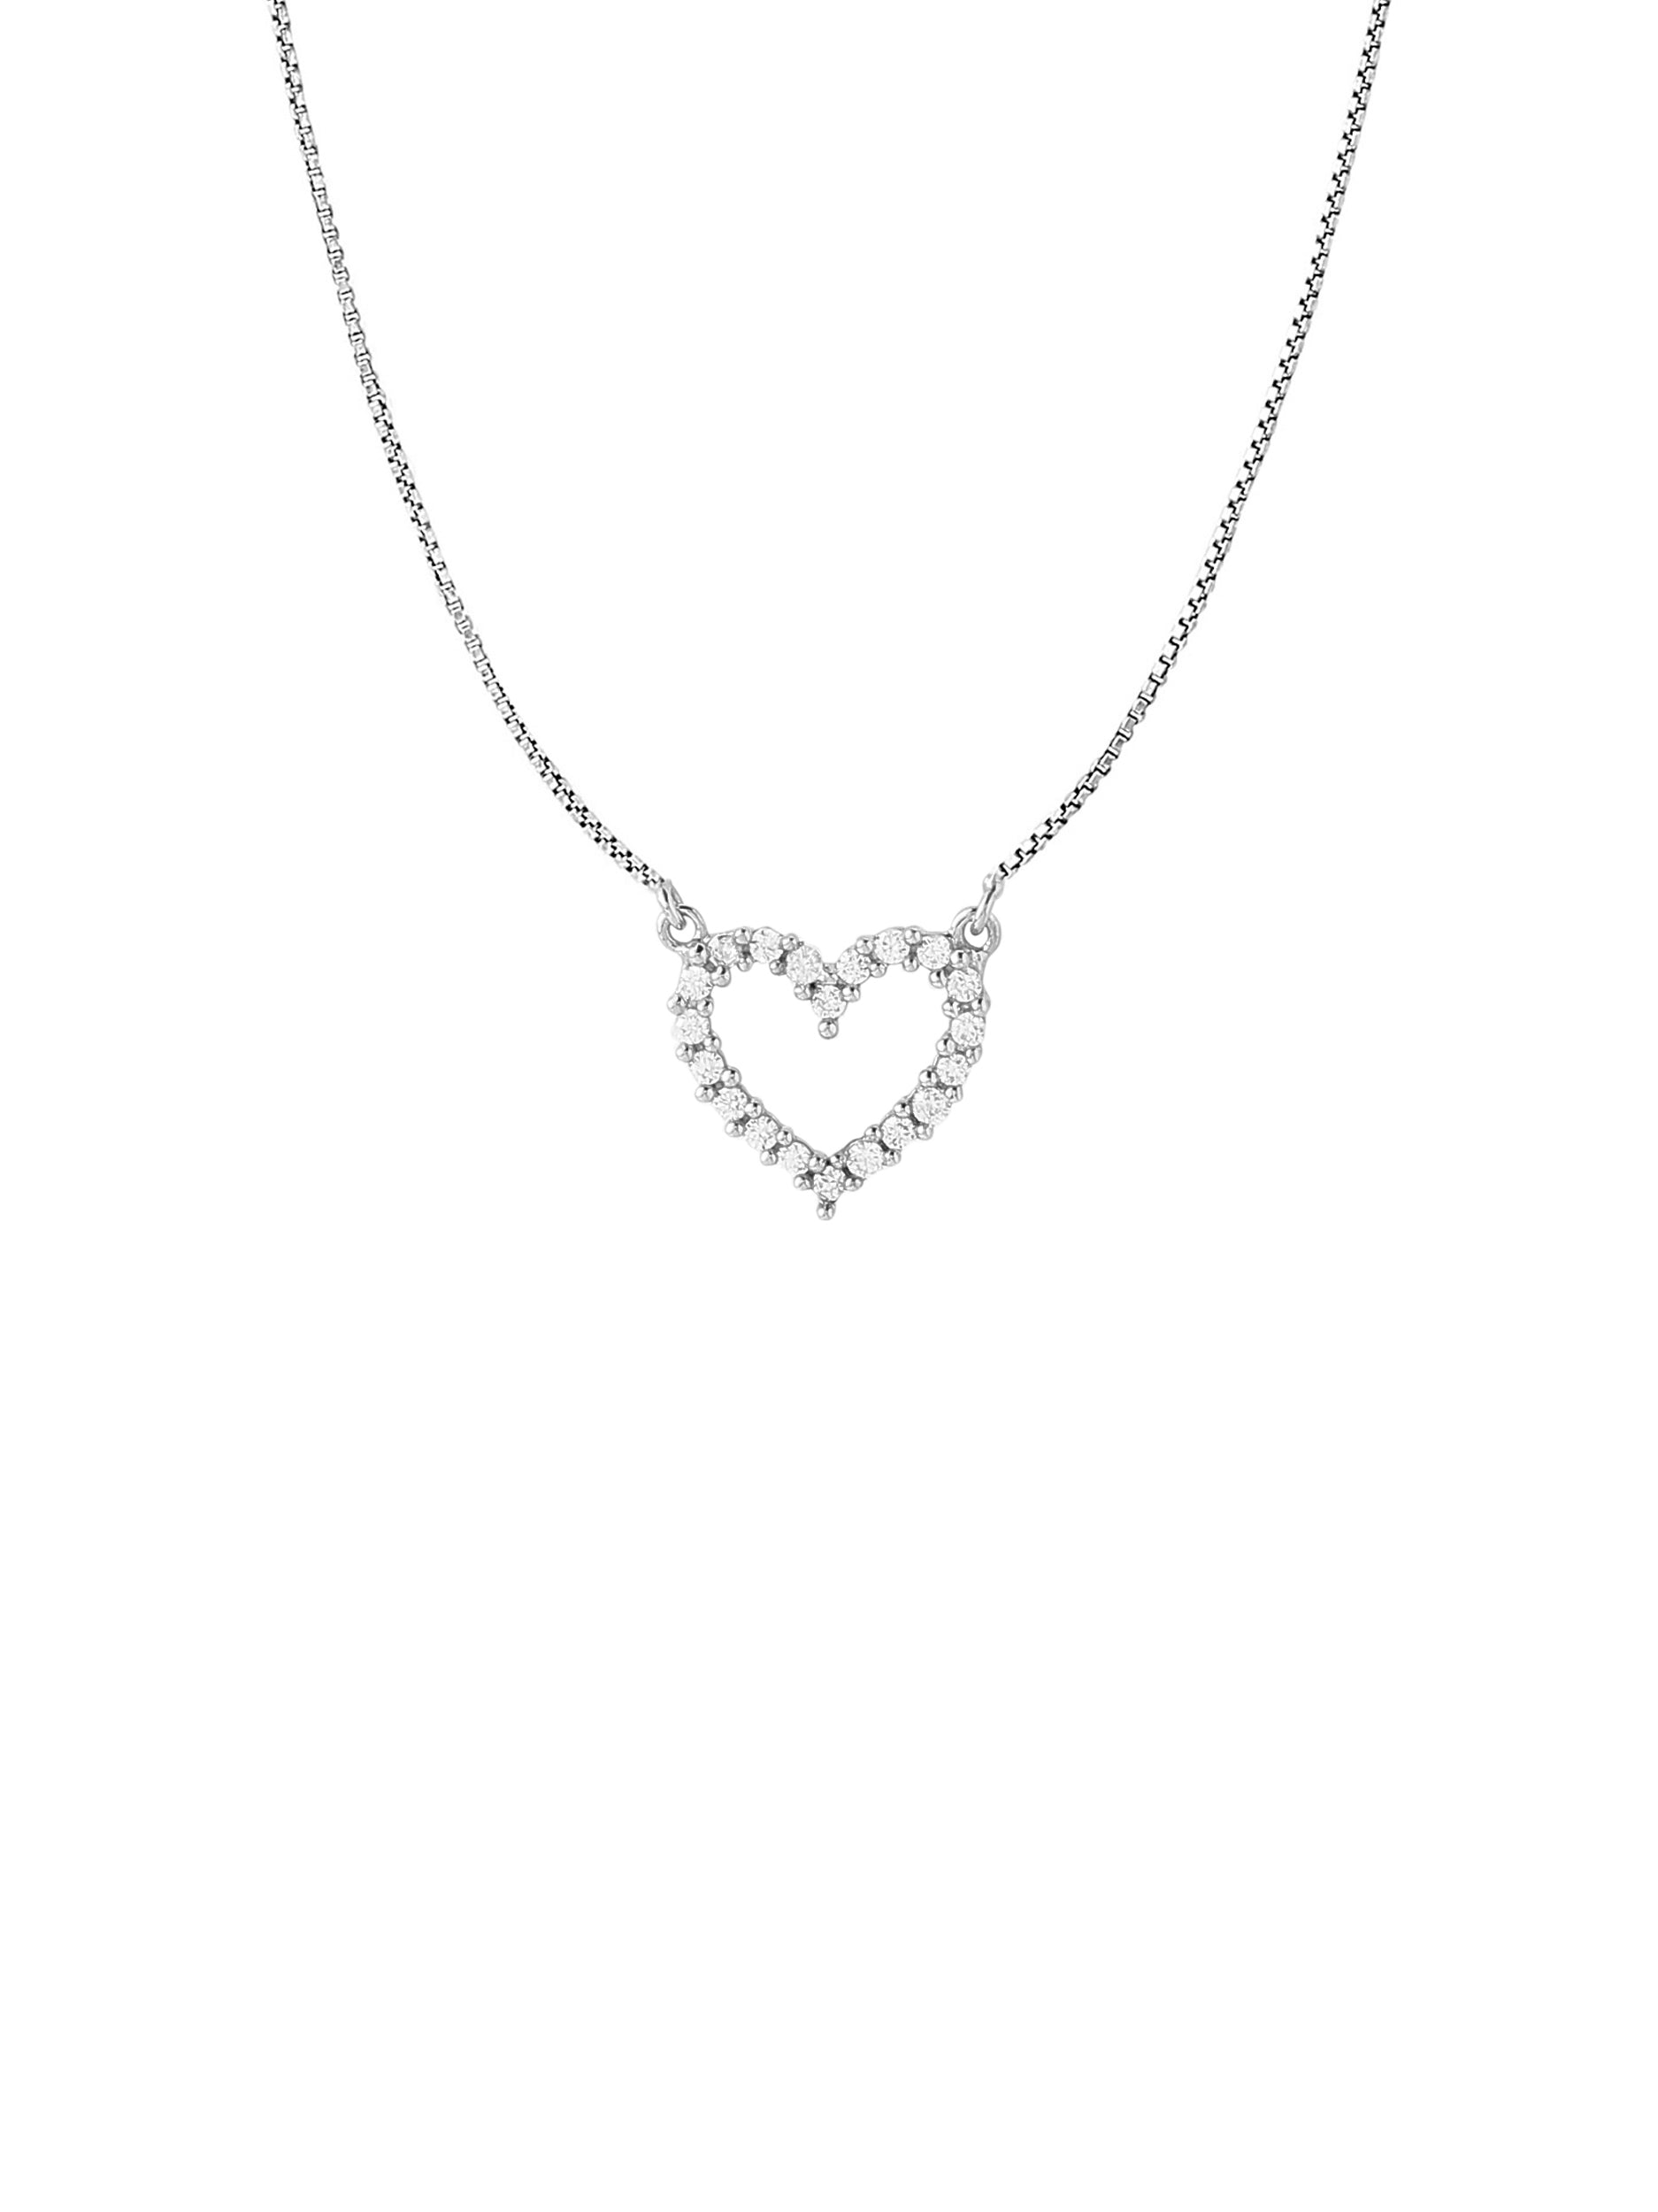 White Gold Color Heart Pendant Made of 925 Sterling Silver Material with 20 Inch Long Silver Chain